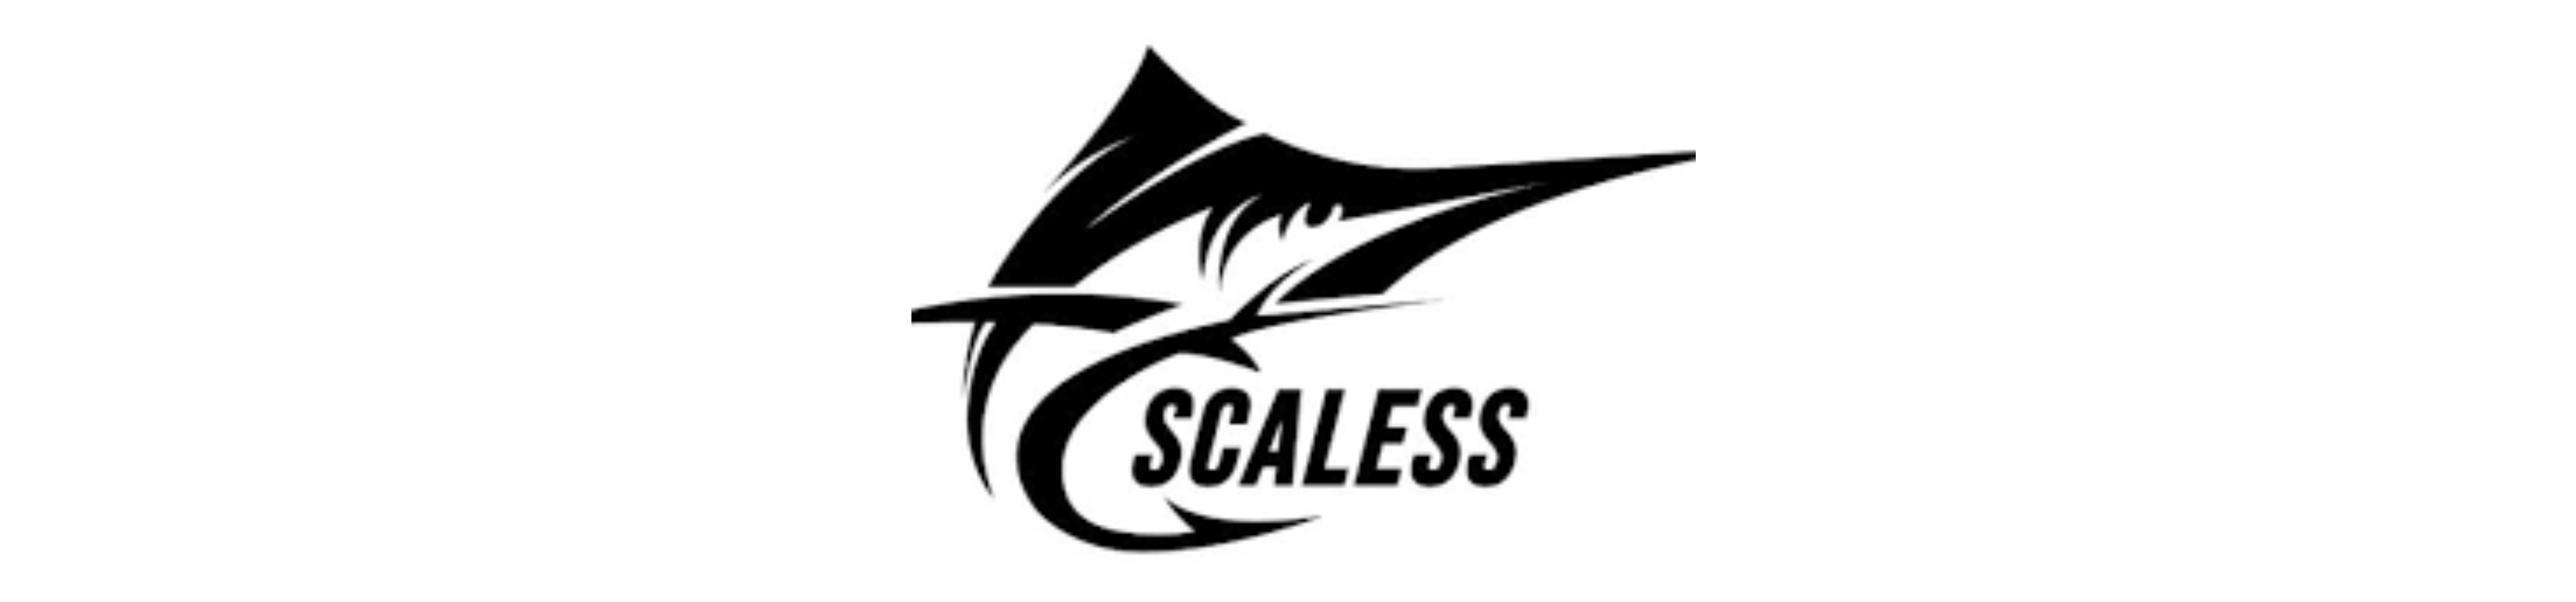 Buy Best Scaless Fishing Accessories now at Fishermanshub